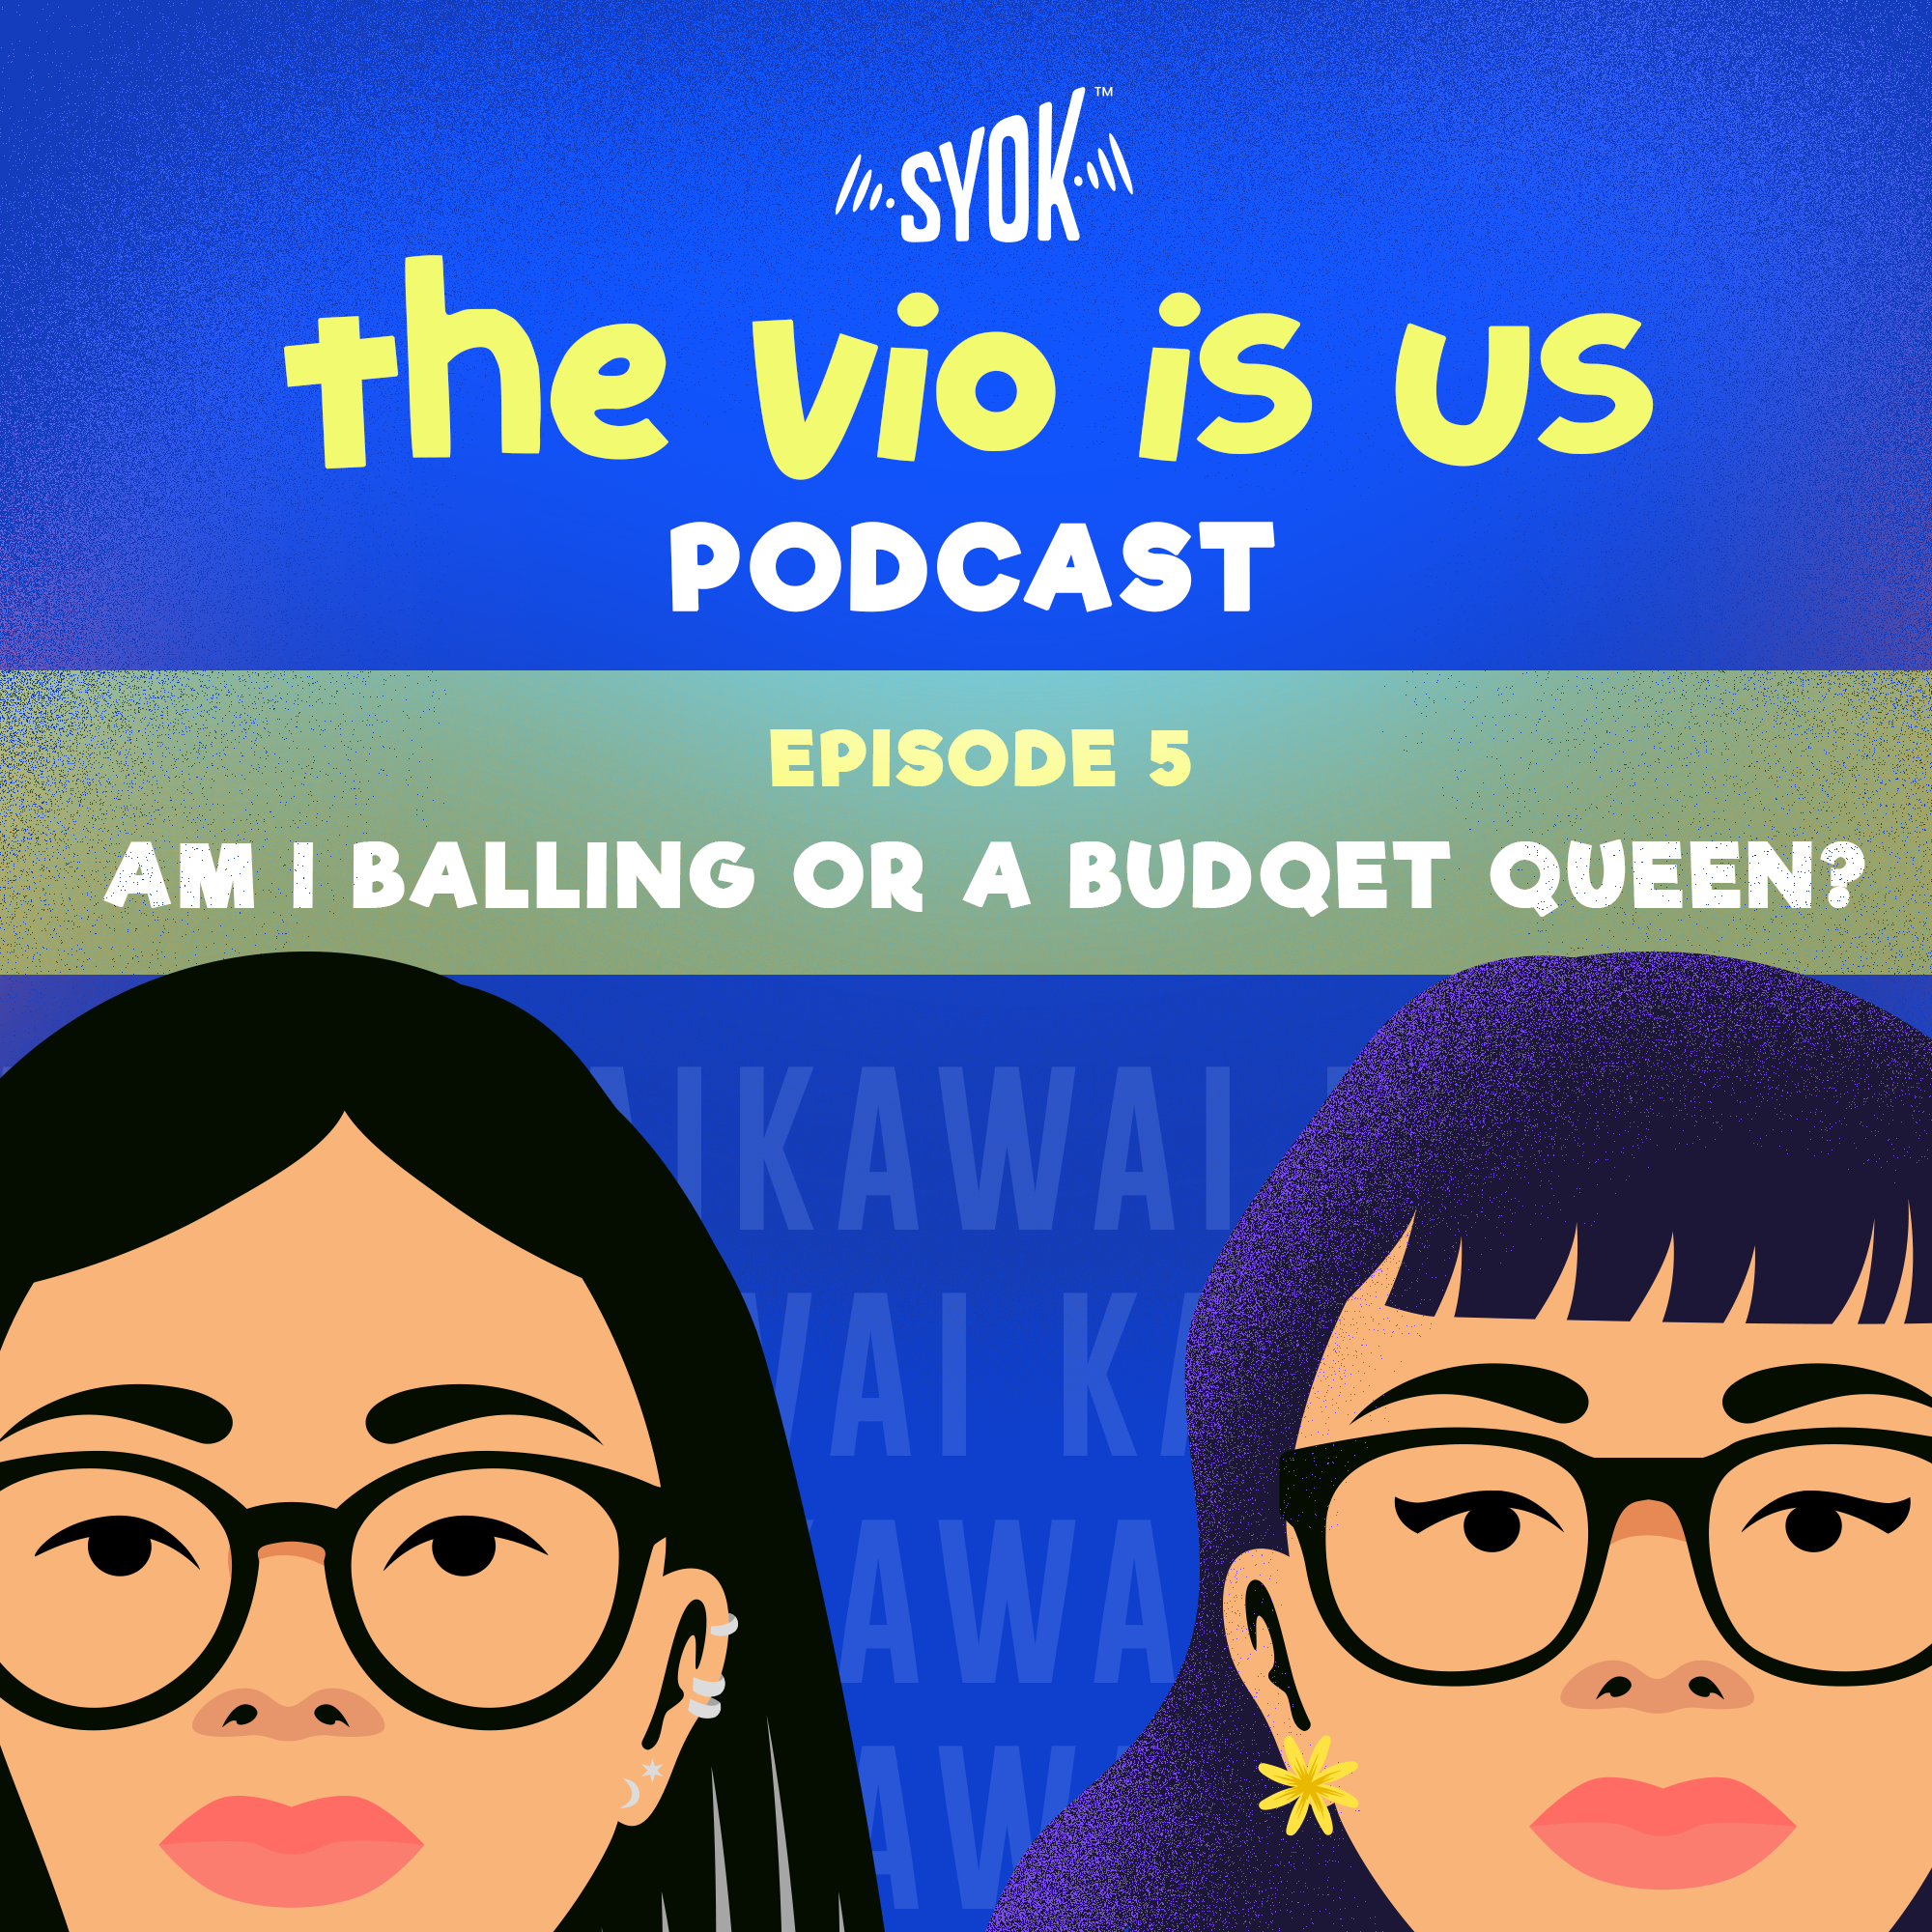 Am I Balling or A Budget Queen? | The Vio Is Us Podcast EP5